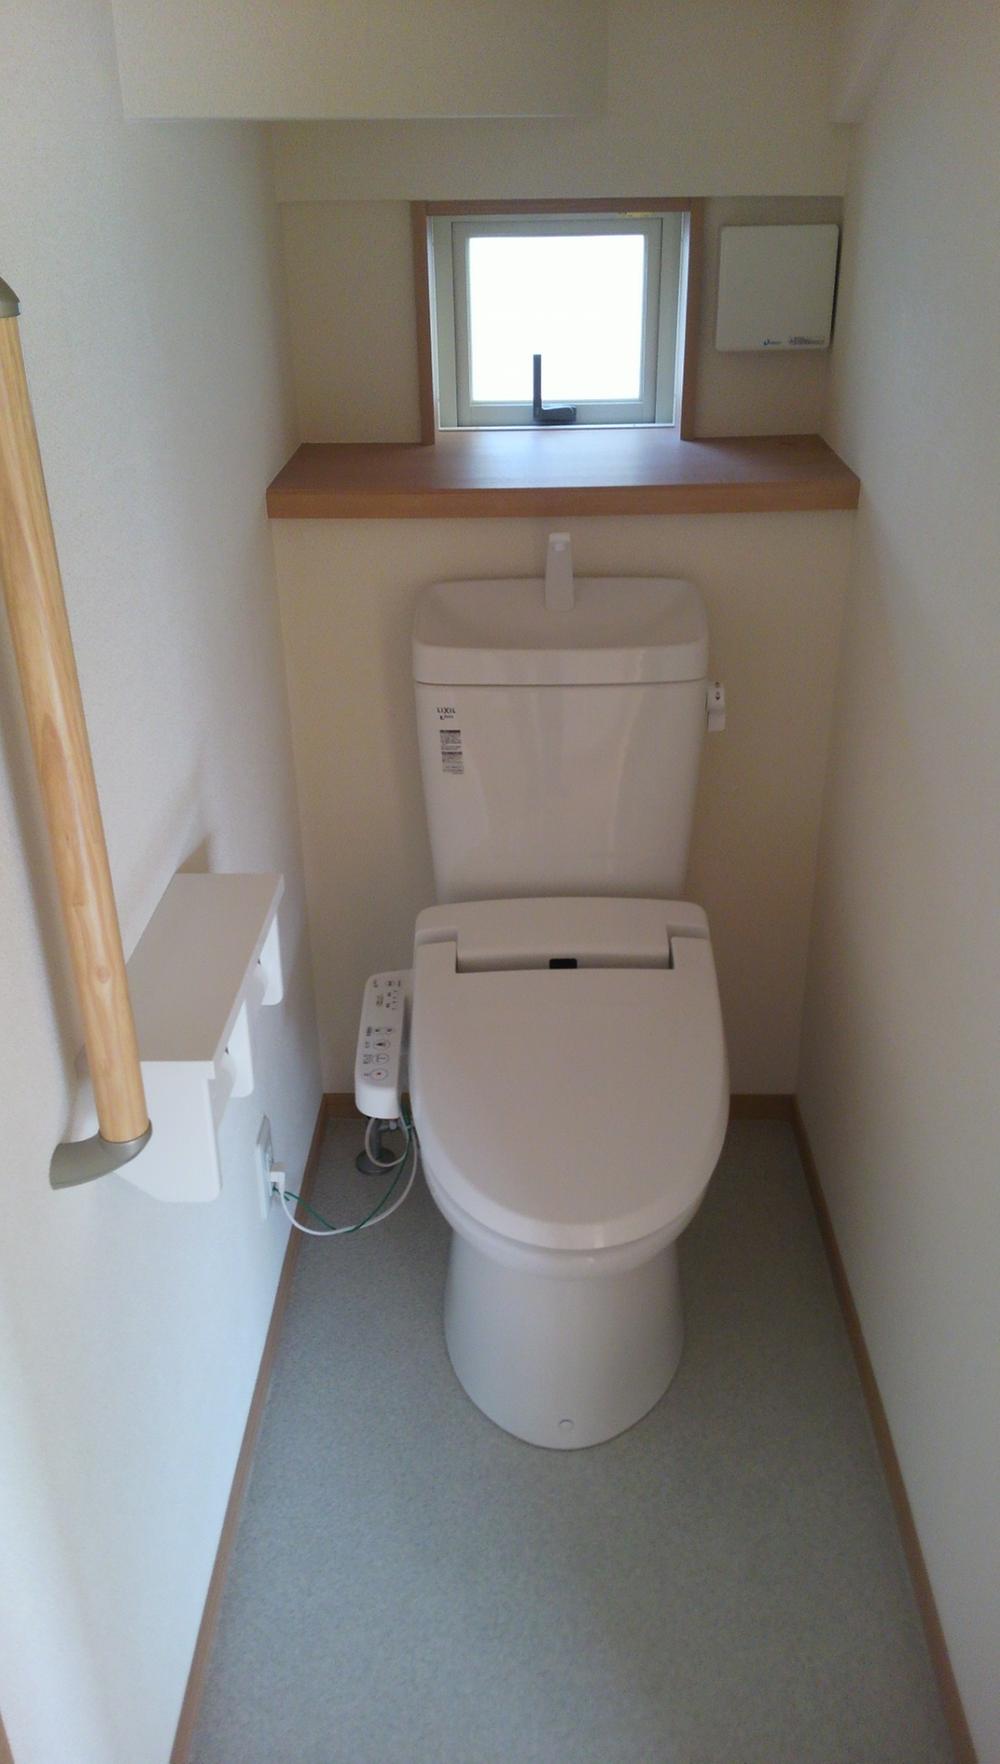 Toilet. Installing a bidet with a toilet on the first floor and the second floor